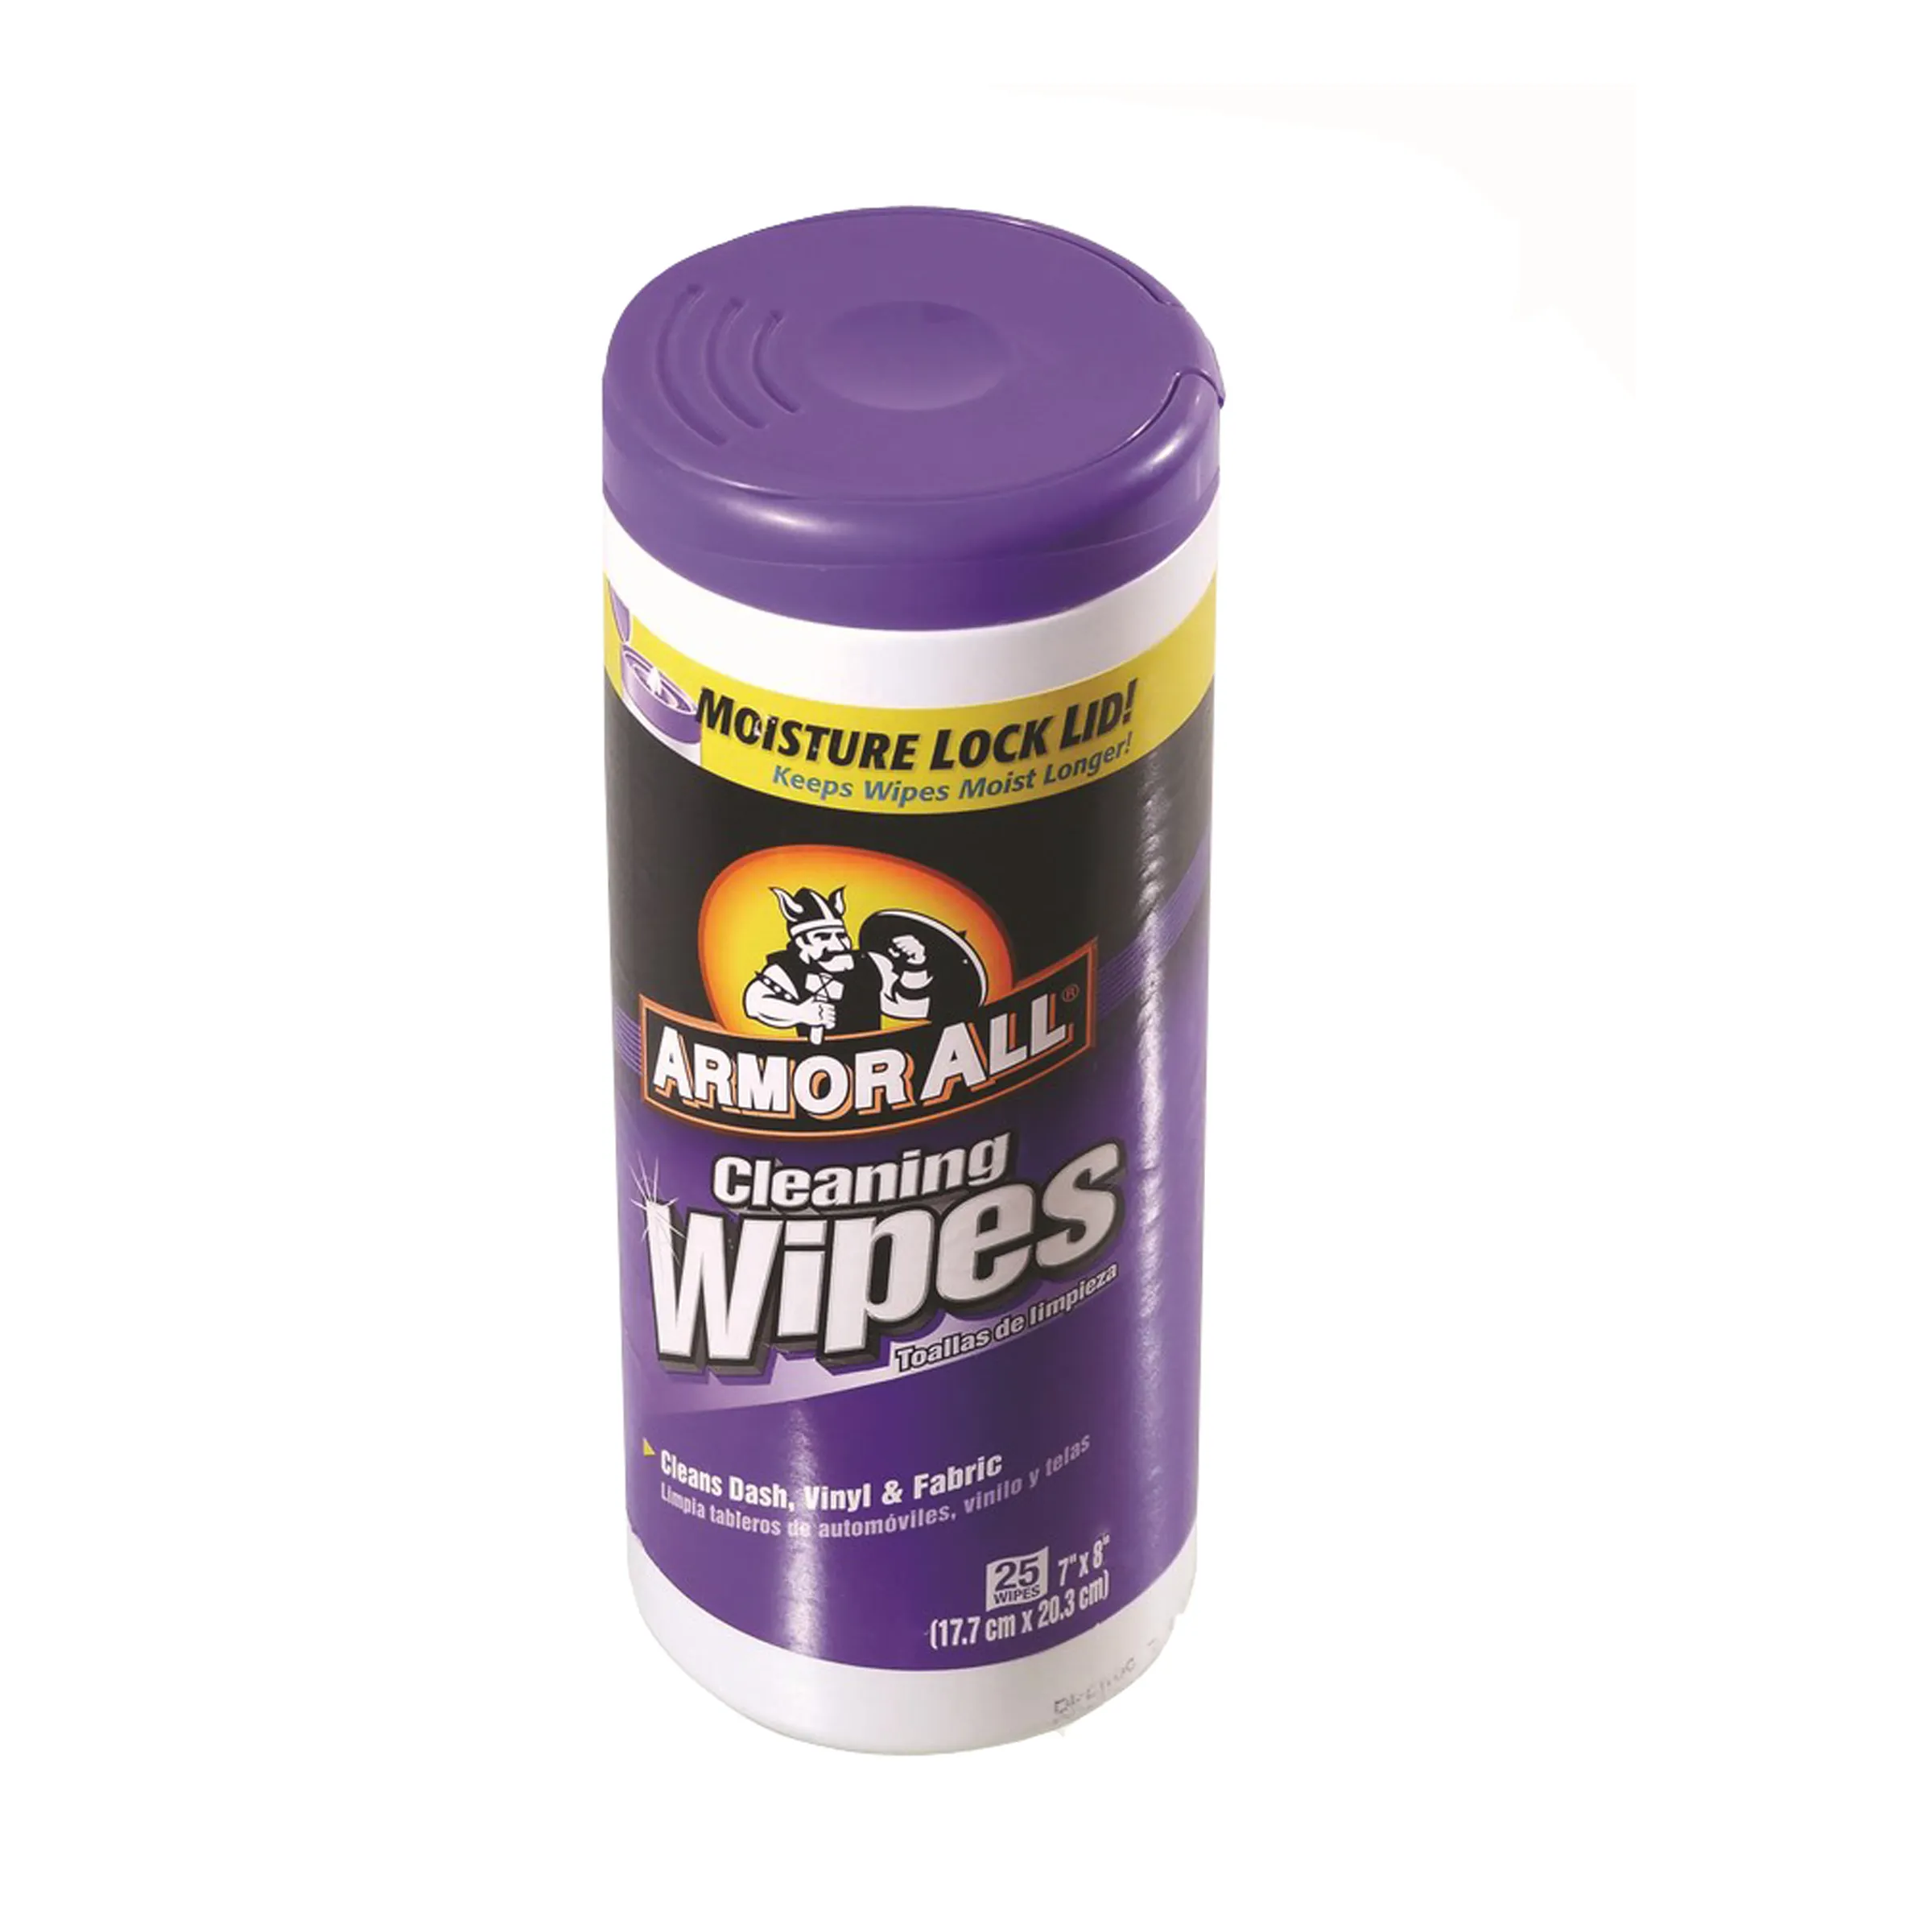 25 counts mulfifunctional heavy duty cleaning wipes canister hand cleaning wipes degrease wipes